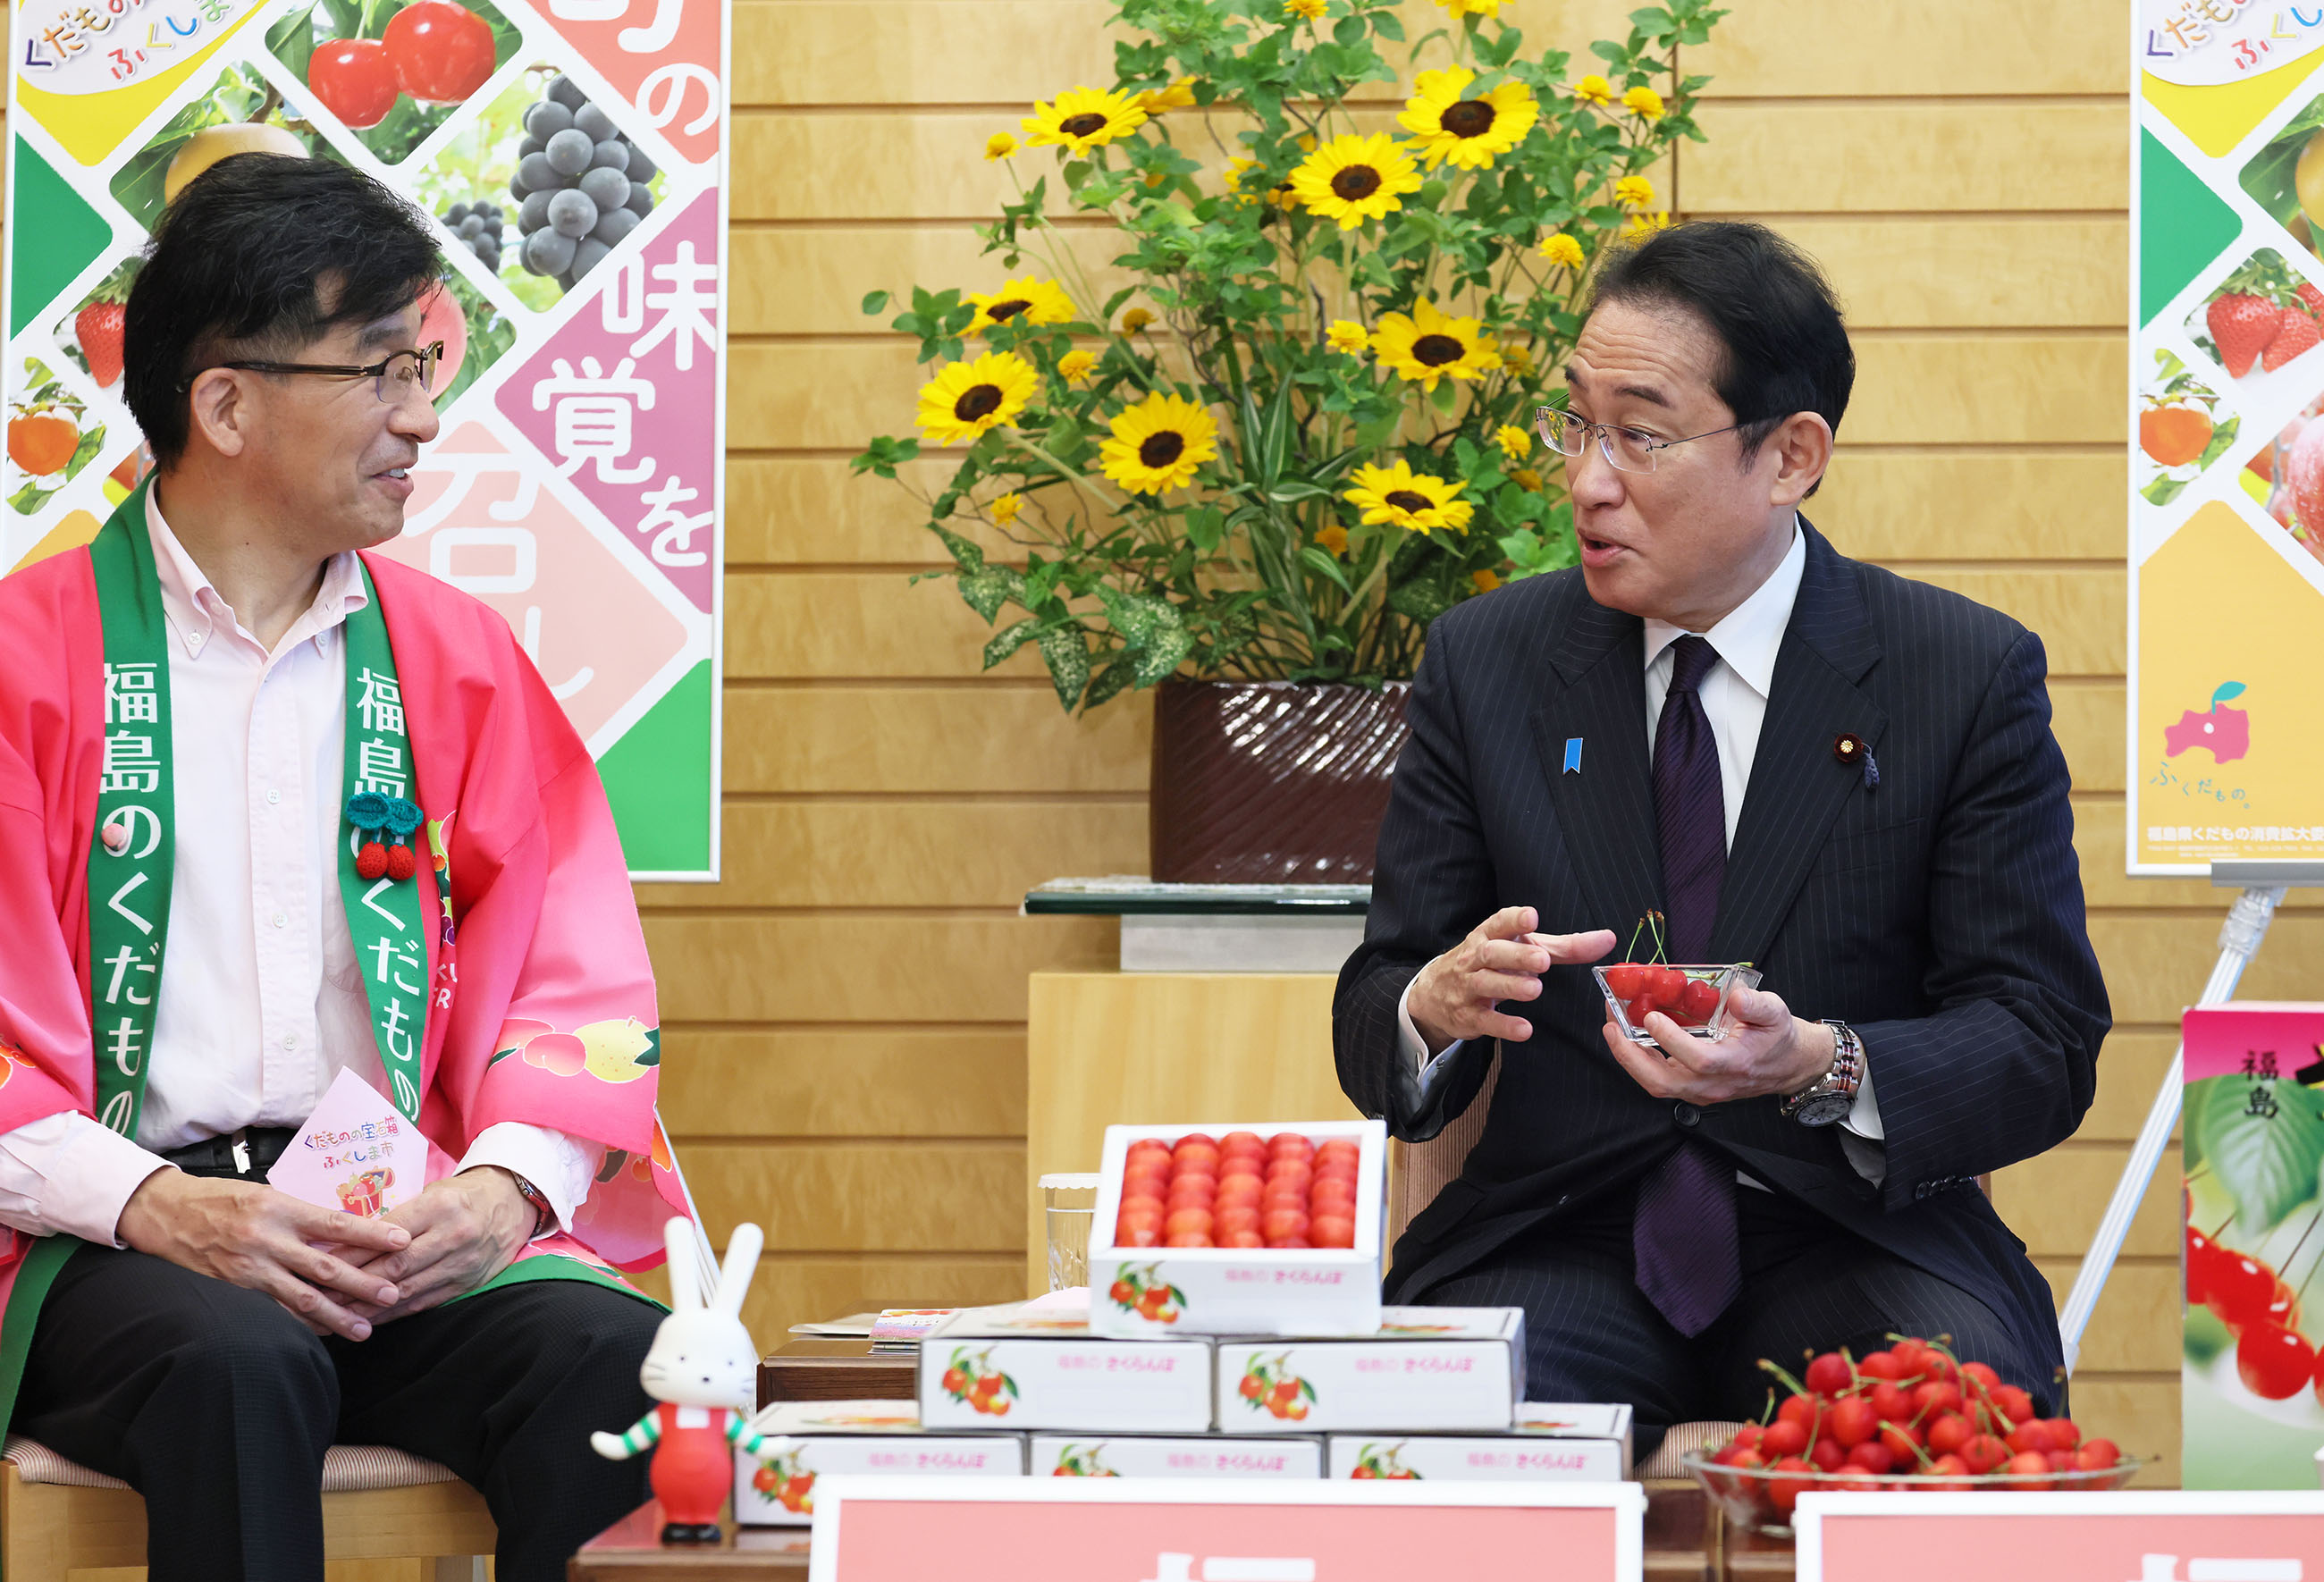 Prime Minister Kishida being presented with cherries (3)